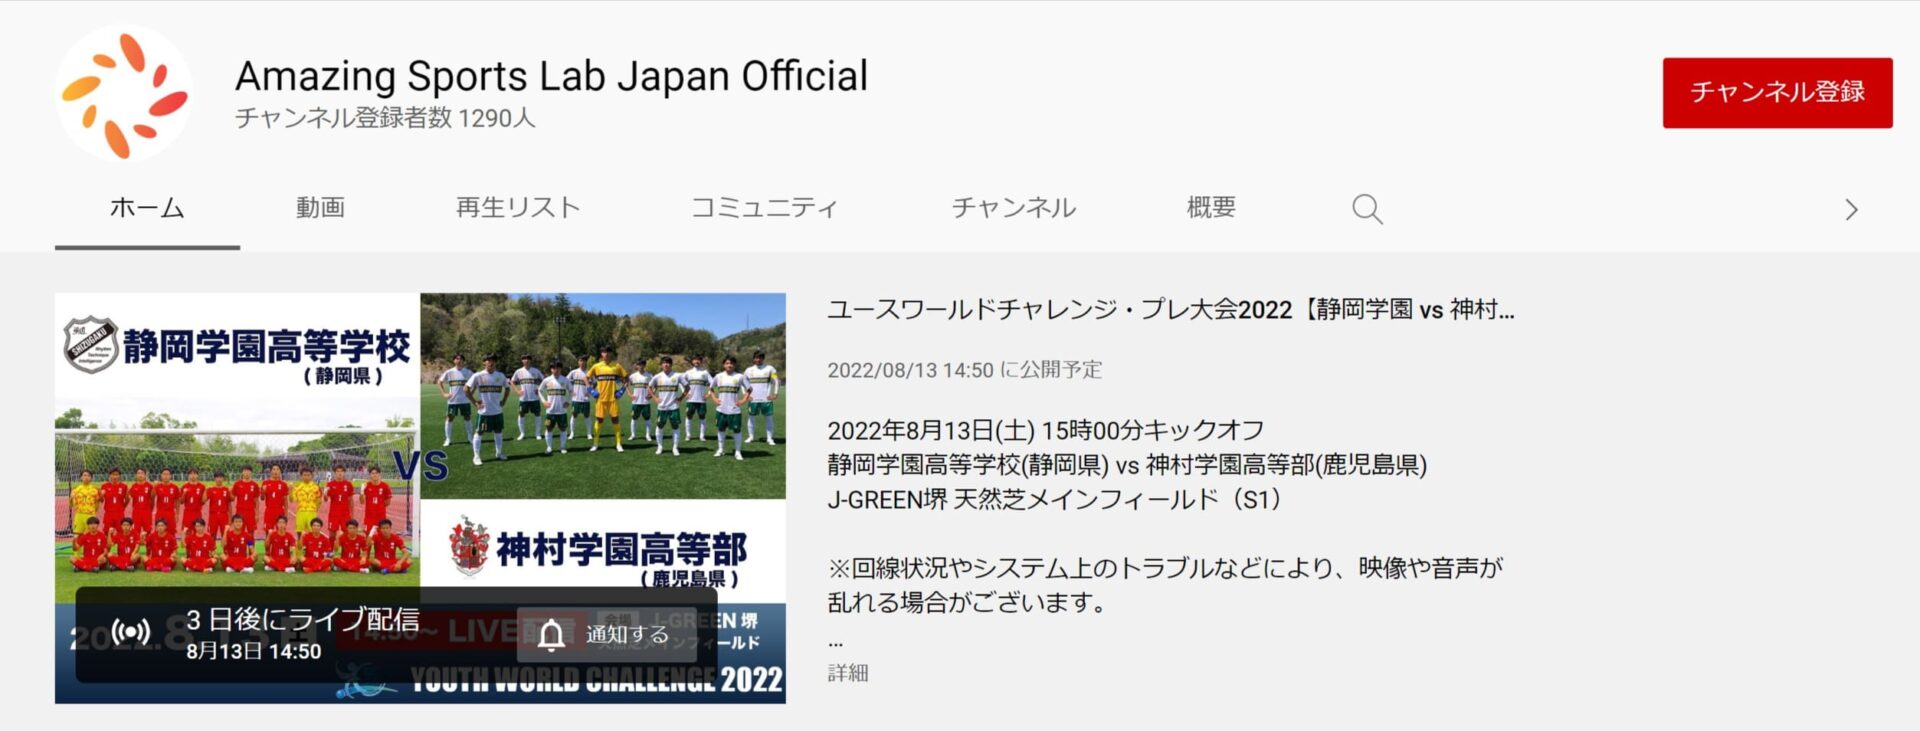 Amazing Sports Lab Japan Official_YouTubeチャンネル (1)